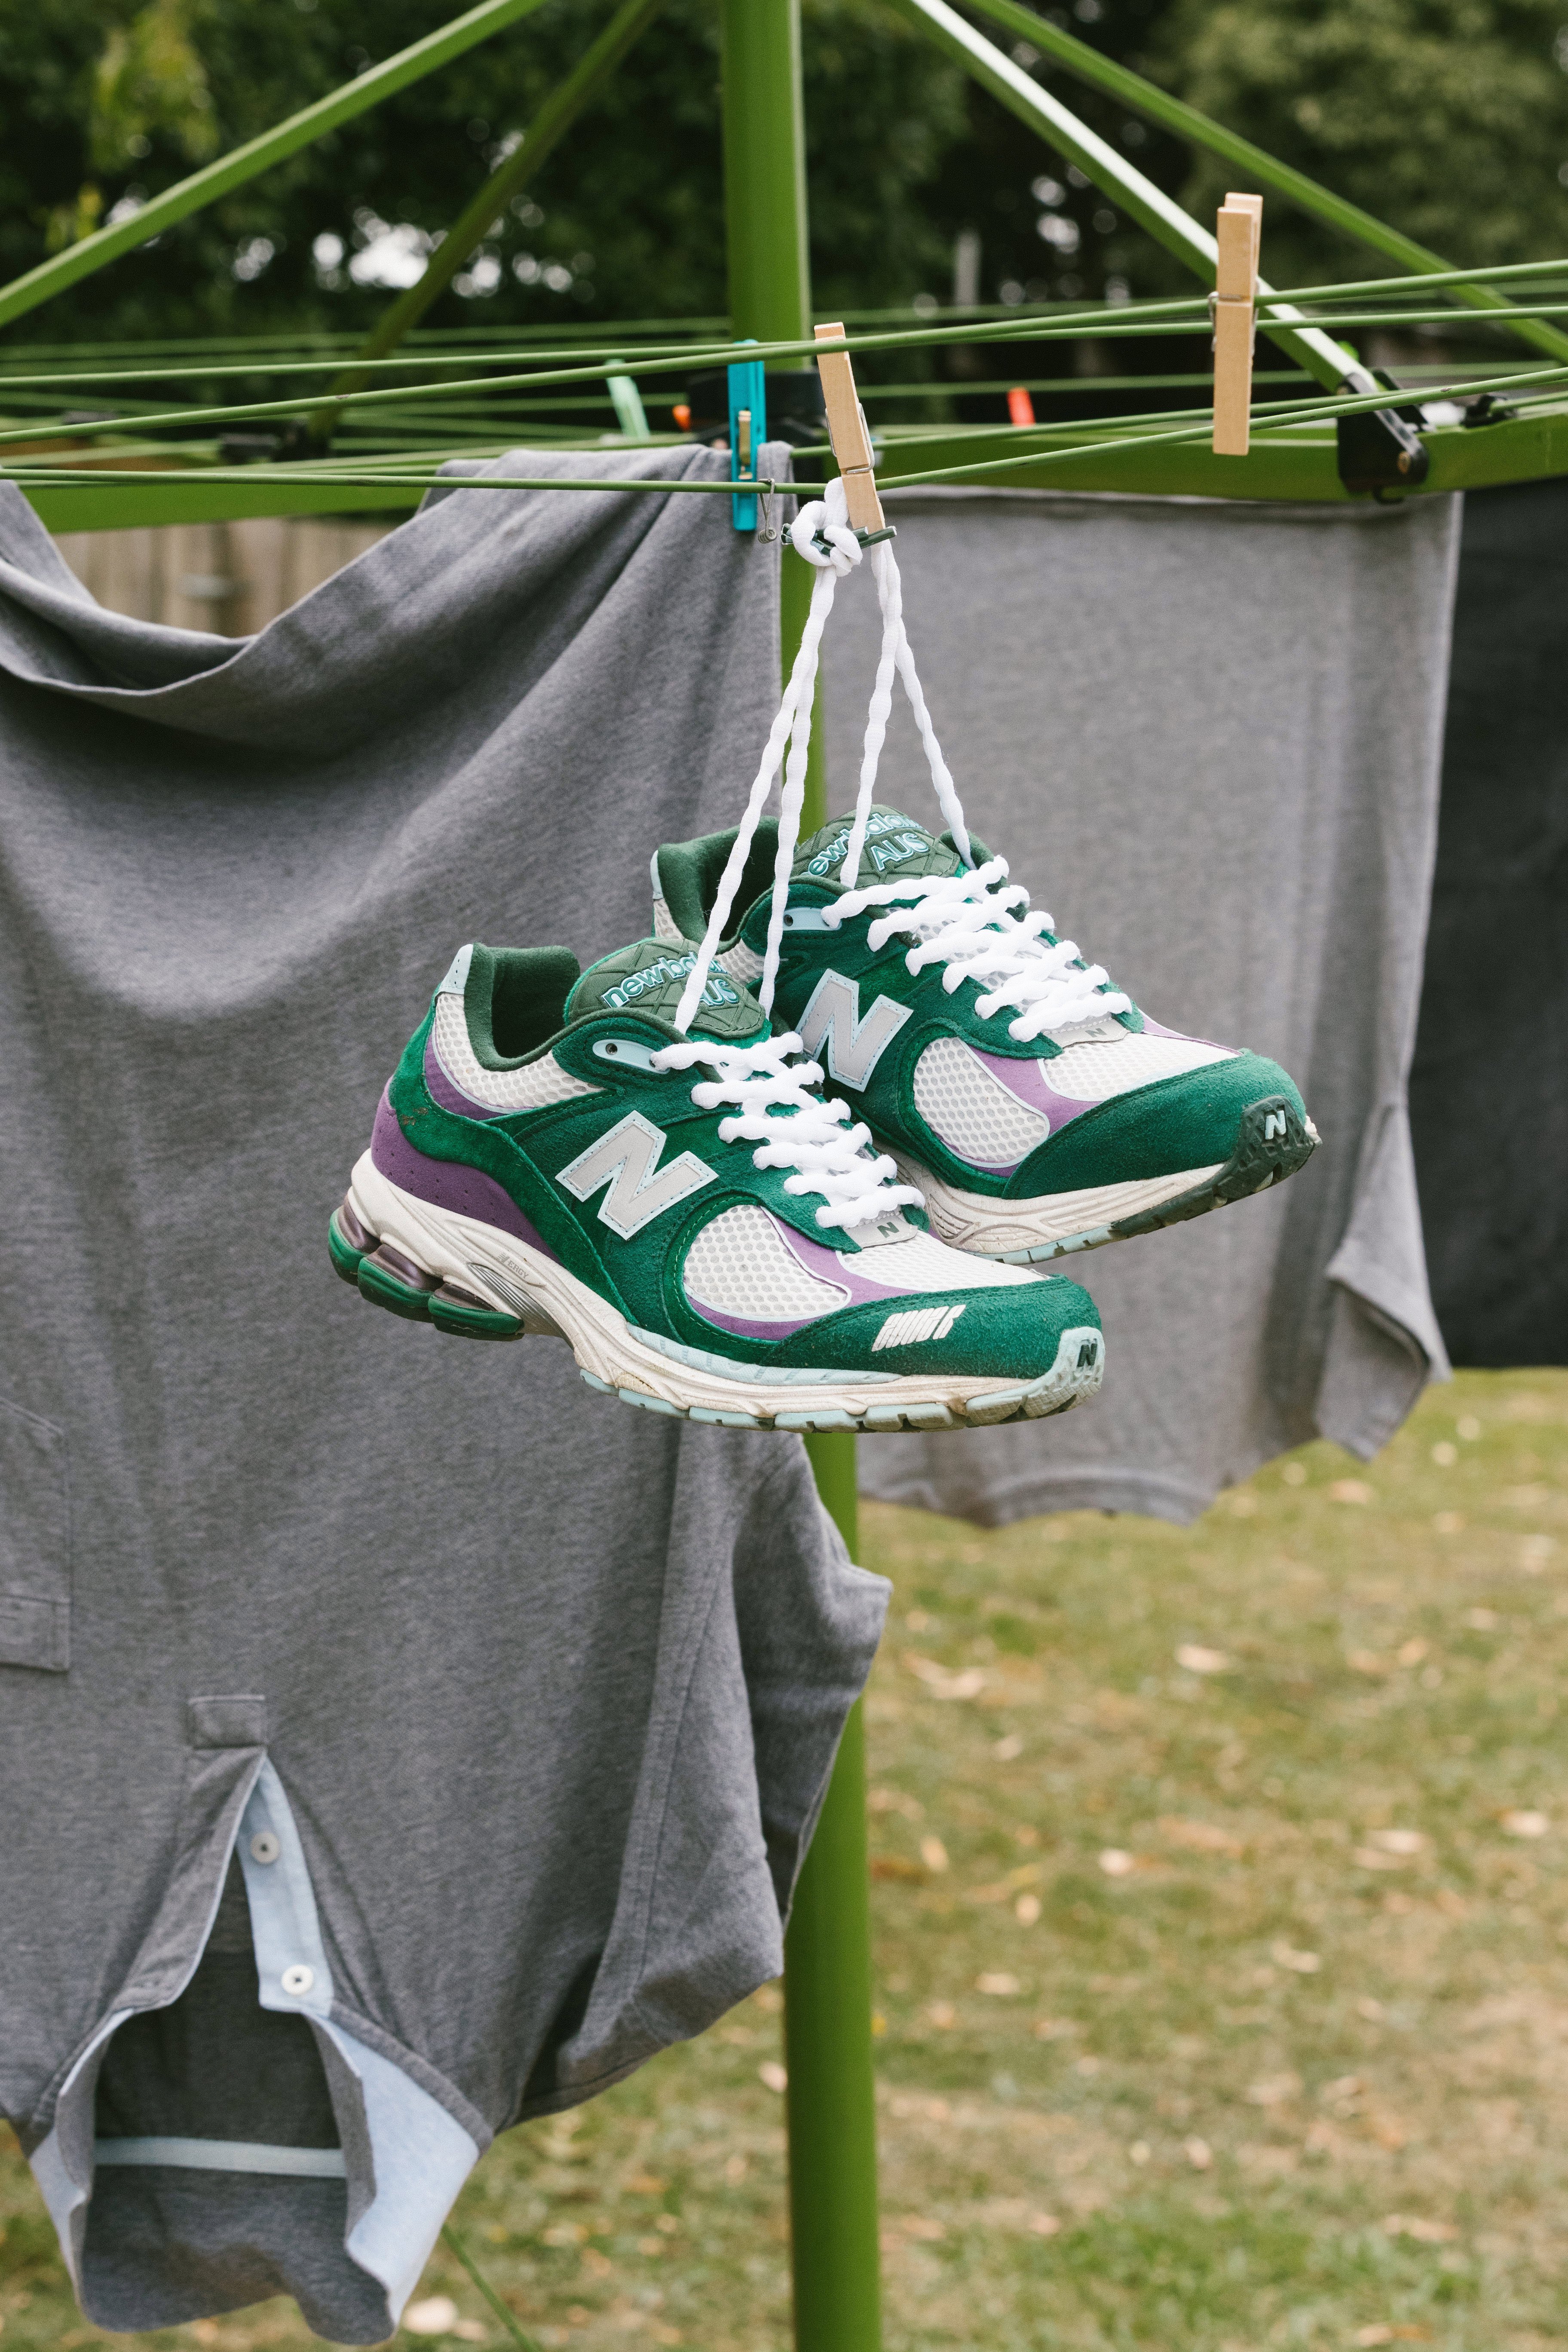 Up There X New Balance 'Backyard Legends' M2002RUT Releasing In Store From 8am AEST Friday July 15th And Online Online From 8am AEST Saturday July 16th.